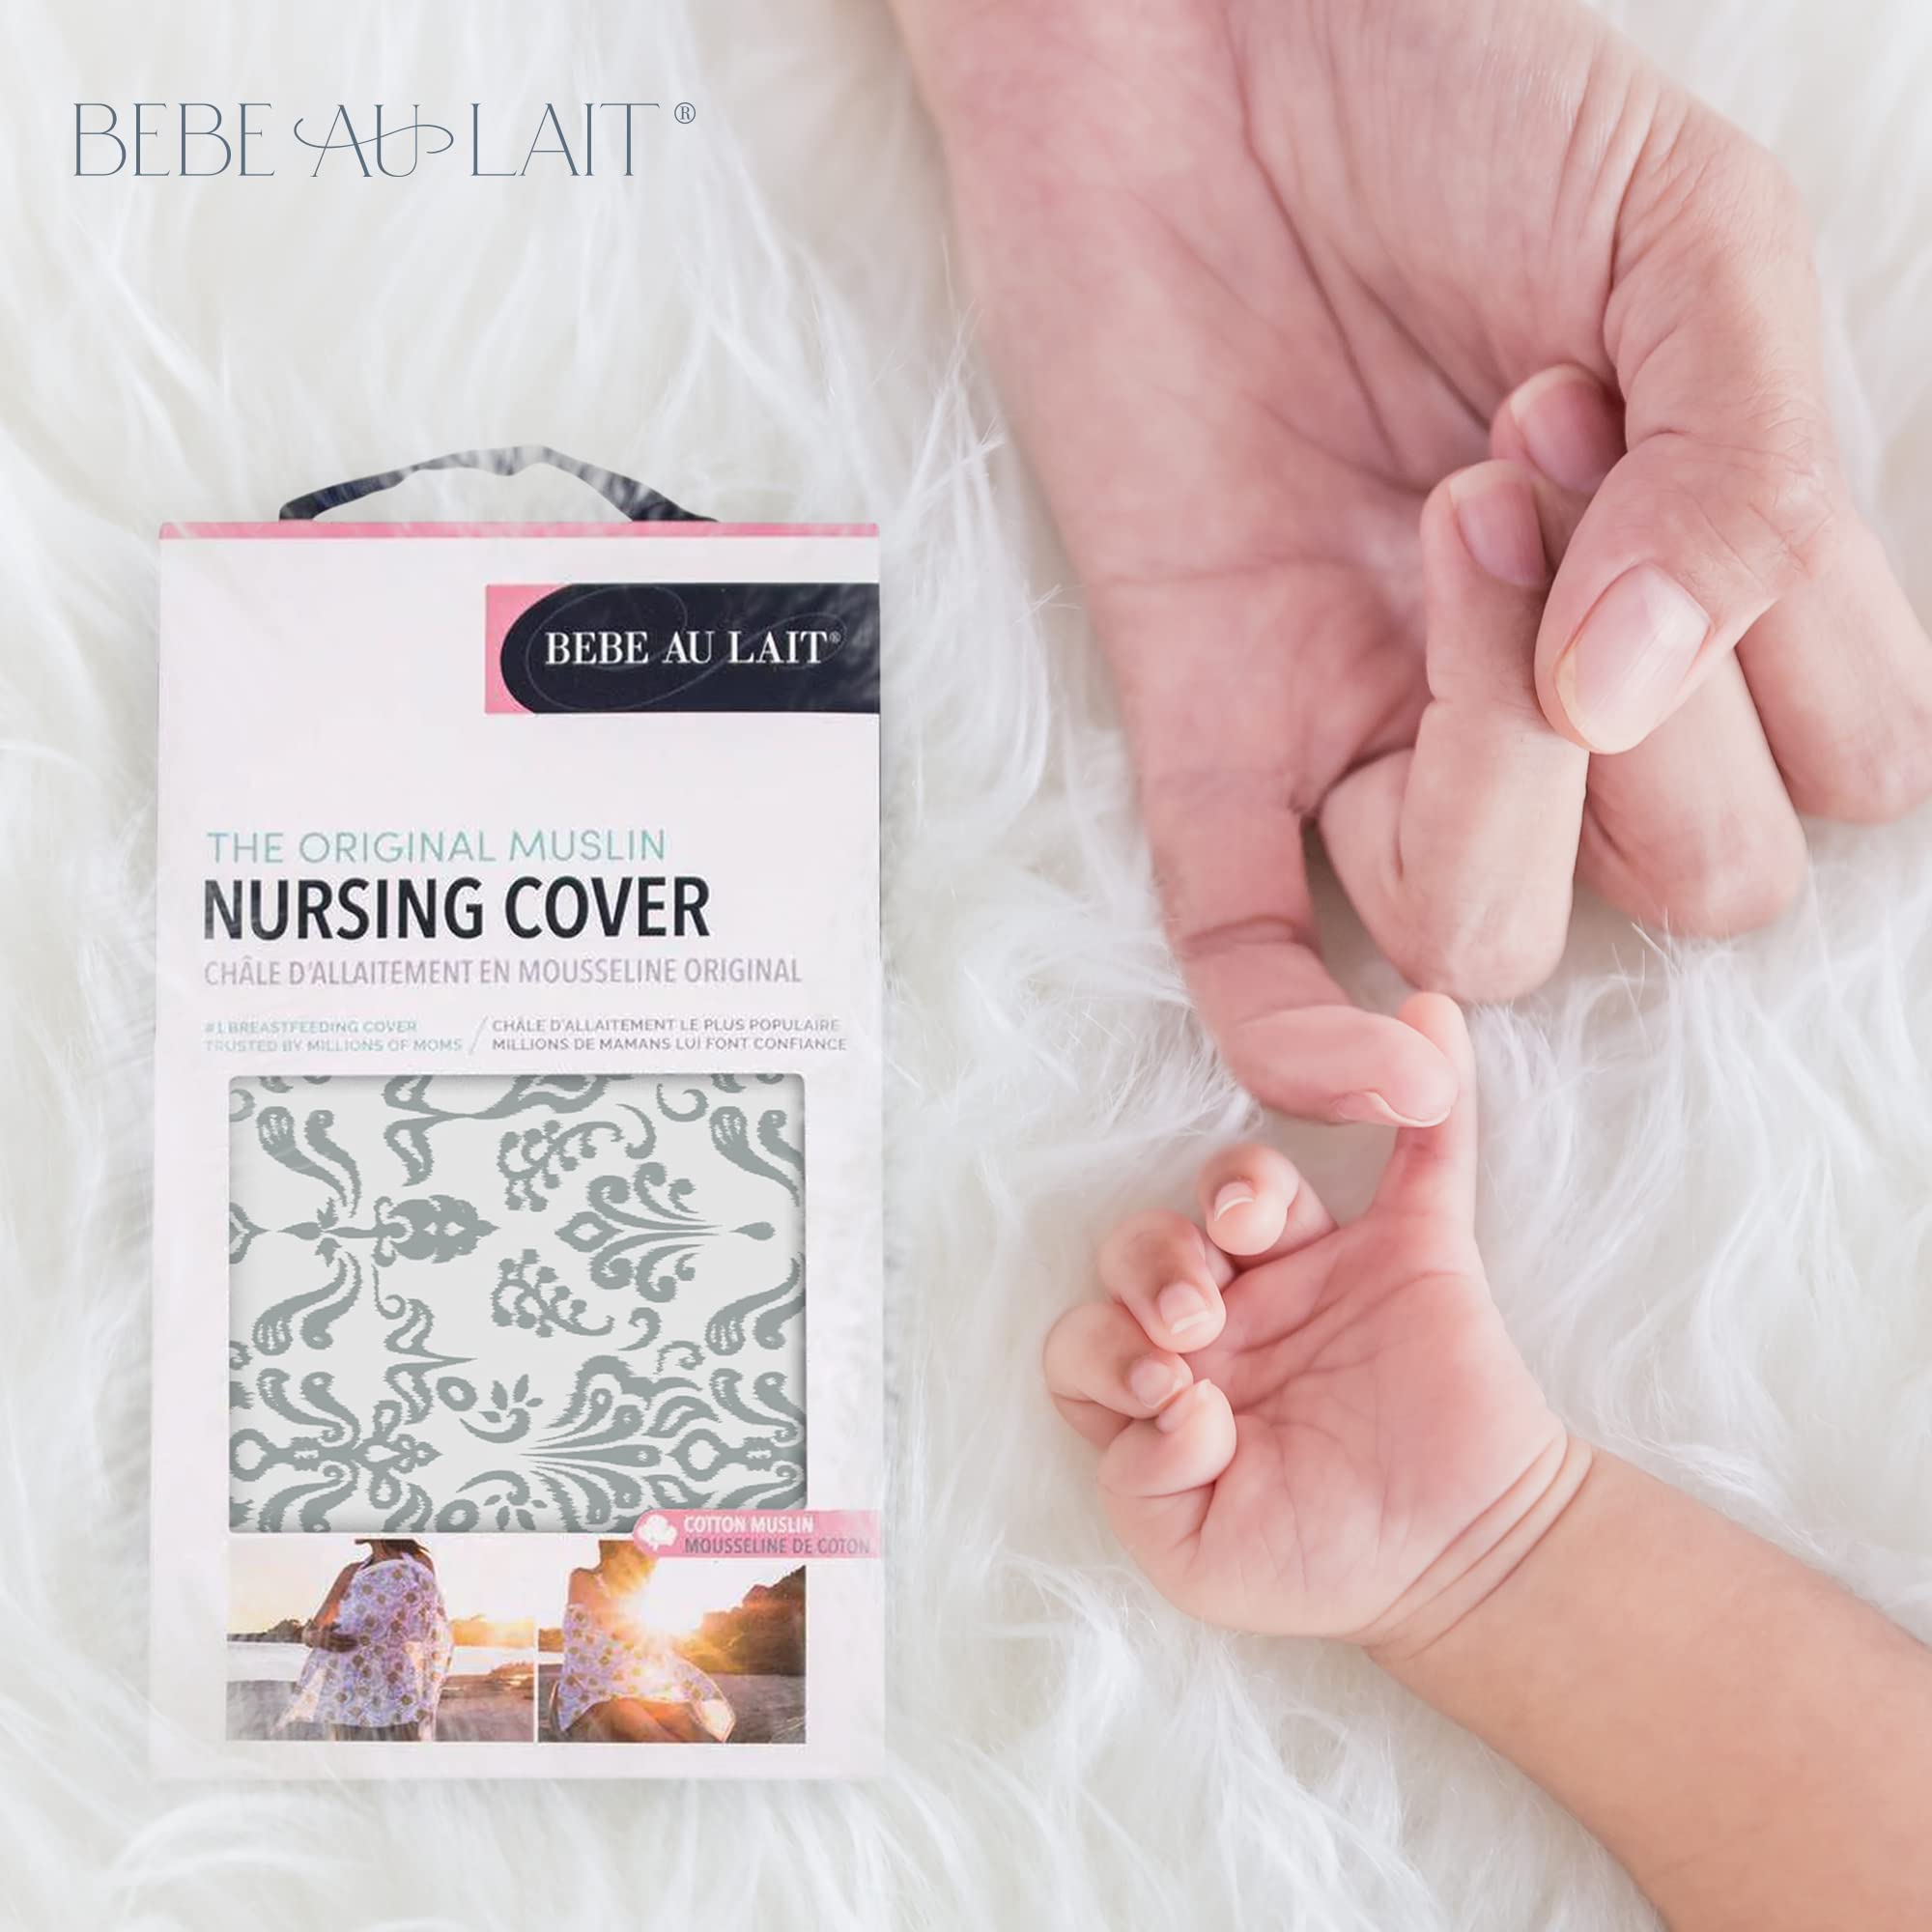 Bebe au Lait Nursing Cover, Apron, Shawl, Privacy Covers for Breast Feeding & Pumping, Breastfeeding Cover for Mom, Soft, & Breathable Muslin Cotton, Full Coverage, One Size Fits All - Atherton